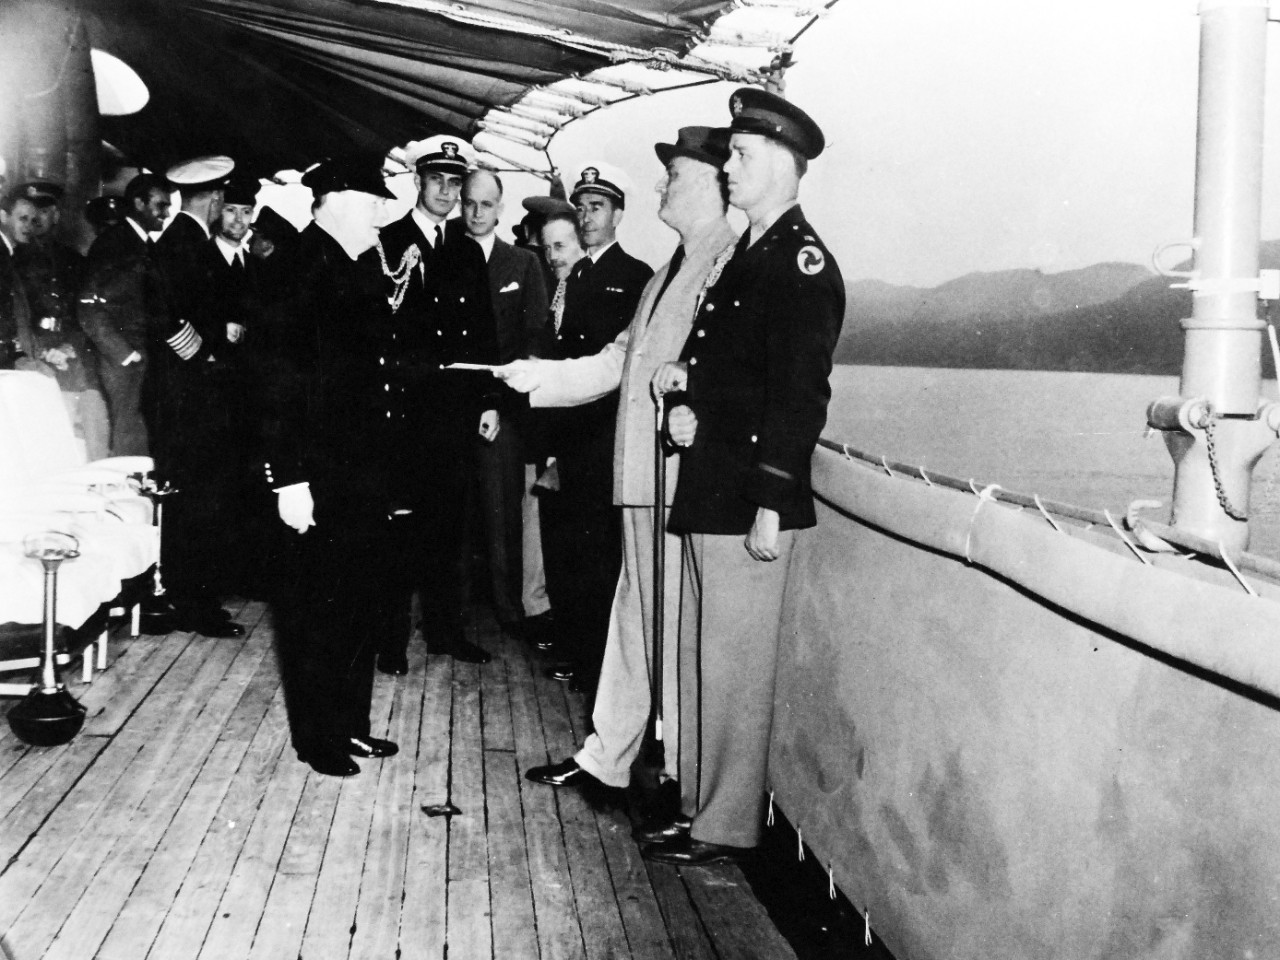 80-G-26861: Atlantic Charter, August 1941.  Prime Minister Winston S. Churchill and party coming onboard USS Augusta (CA-31) during the Atlantic Charter meeting.  Shown:   President Roosevelt receives a message from His Majesty King George VI.   Photograph released August 1941.   Official U.S. Navy Photograph, now in the collections of the National Archives.  (2016/03/22).